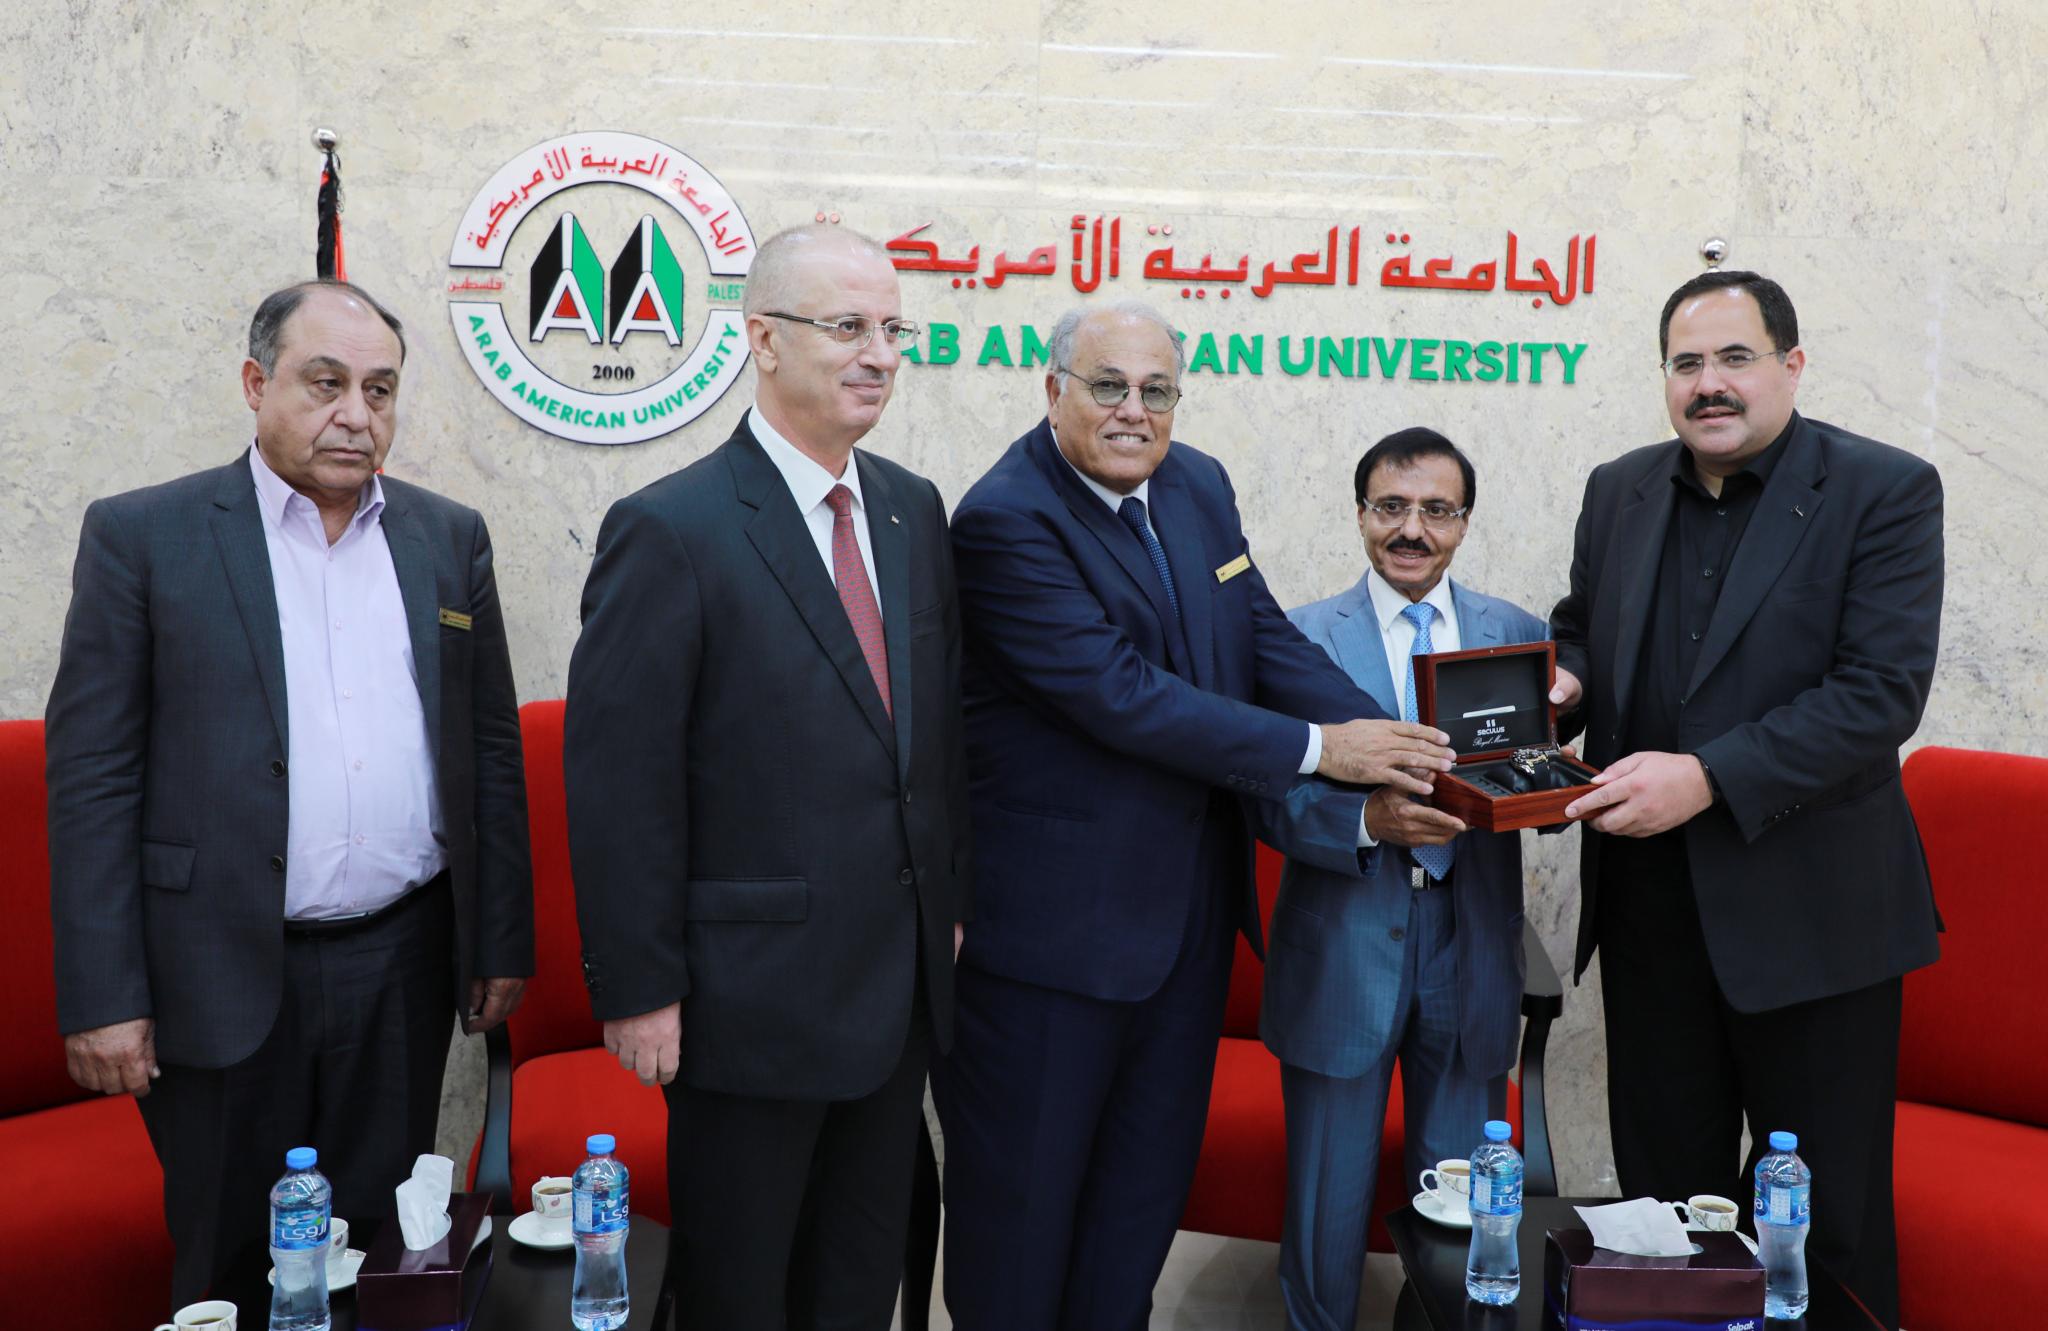 Celebration of Palestinian Curriculum Completion in the Presence of Dr. Rami Al-Hamdalla